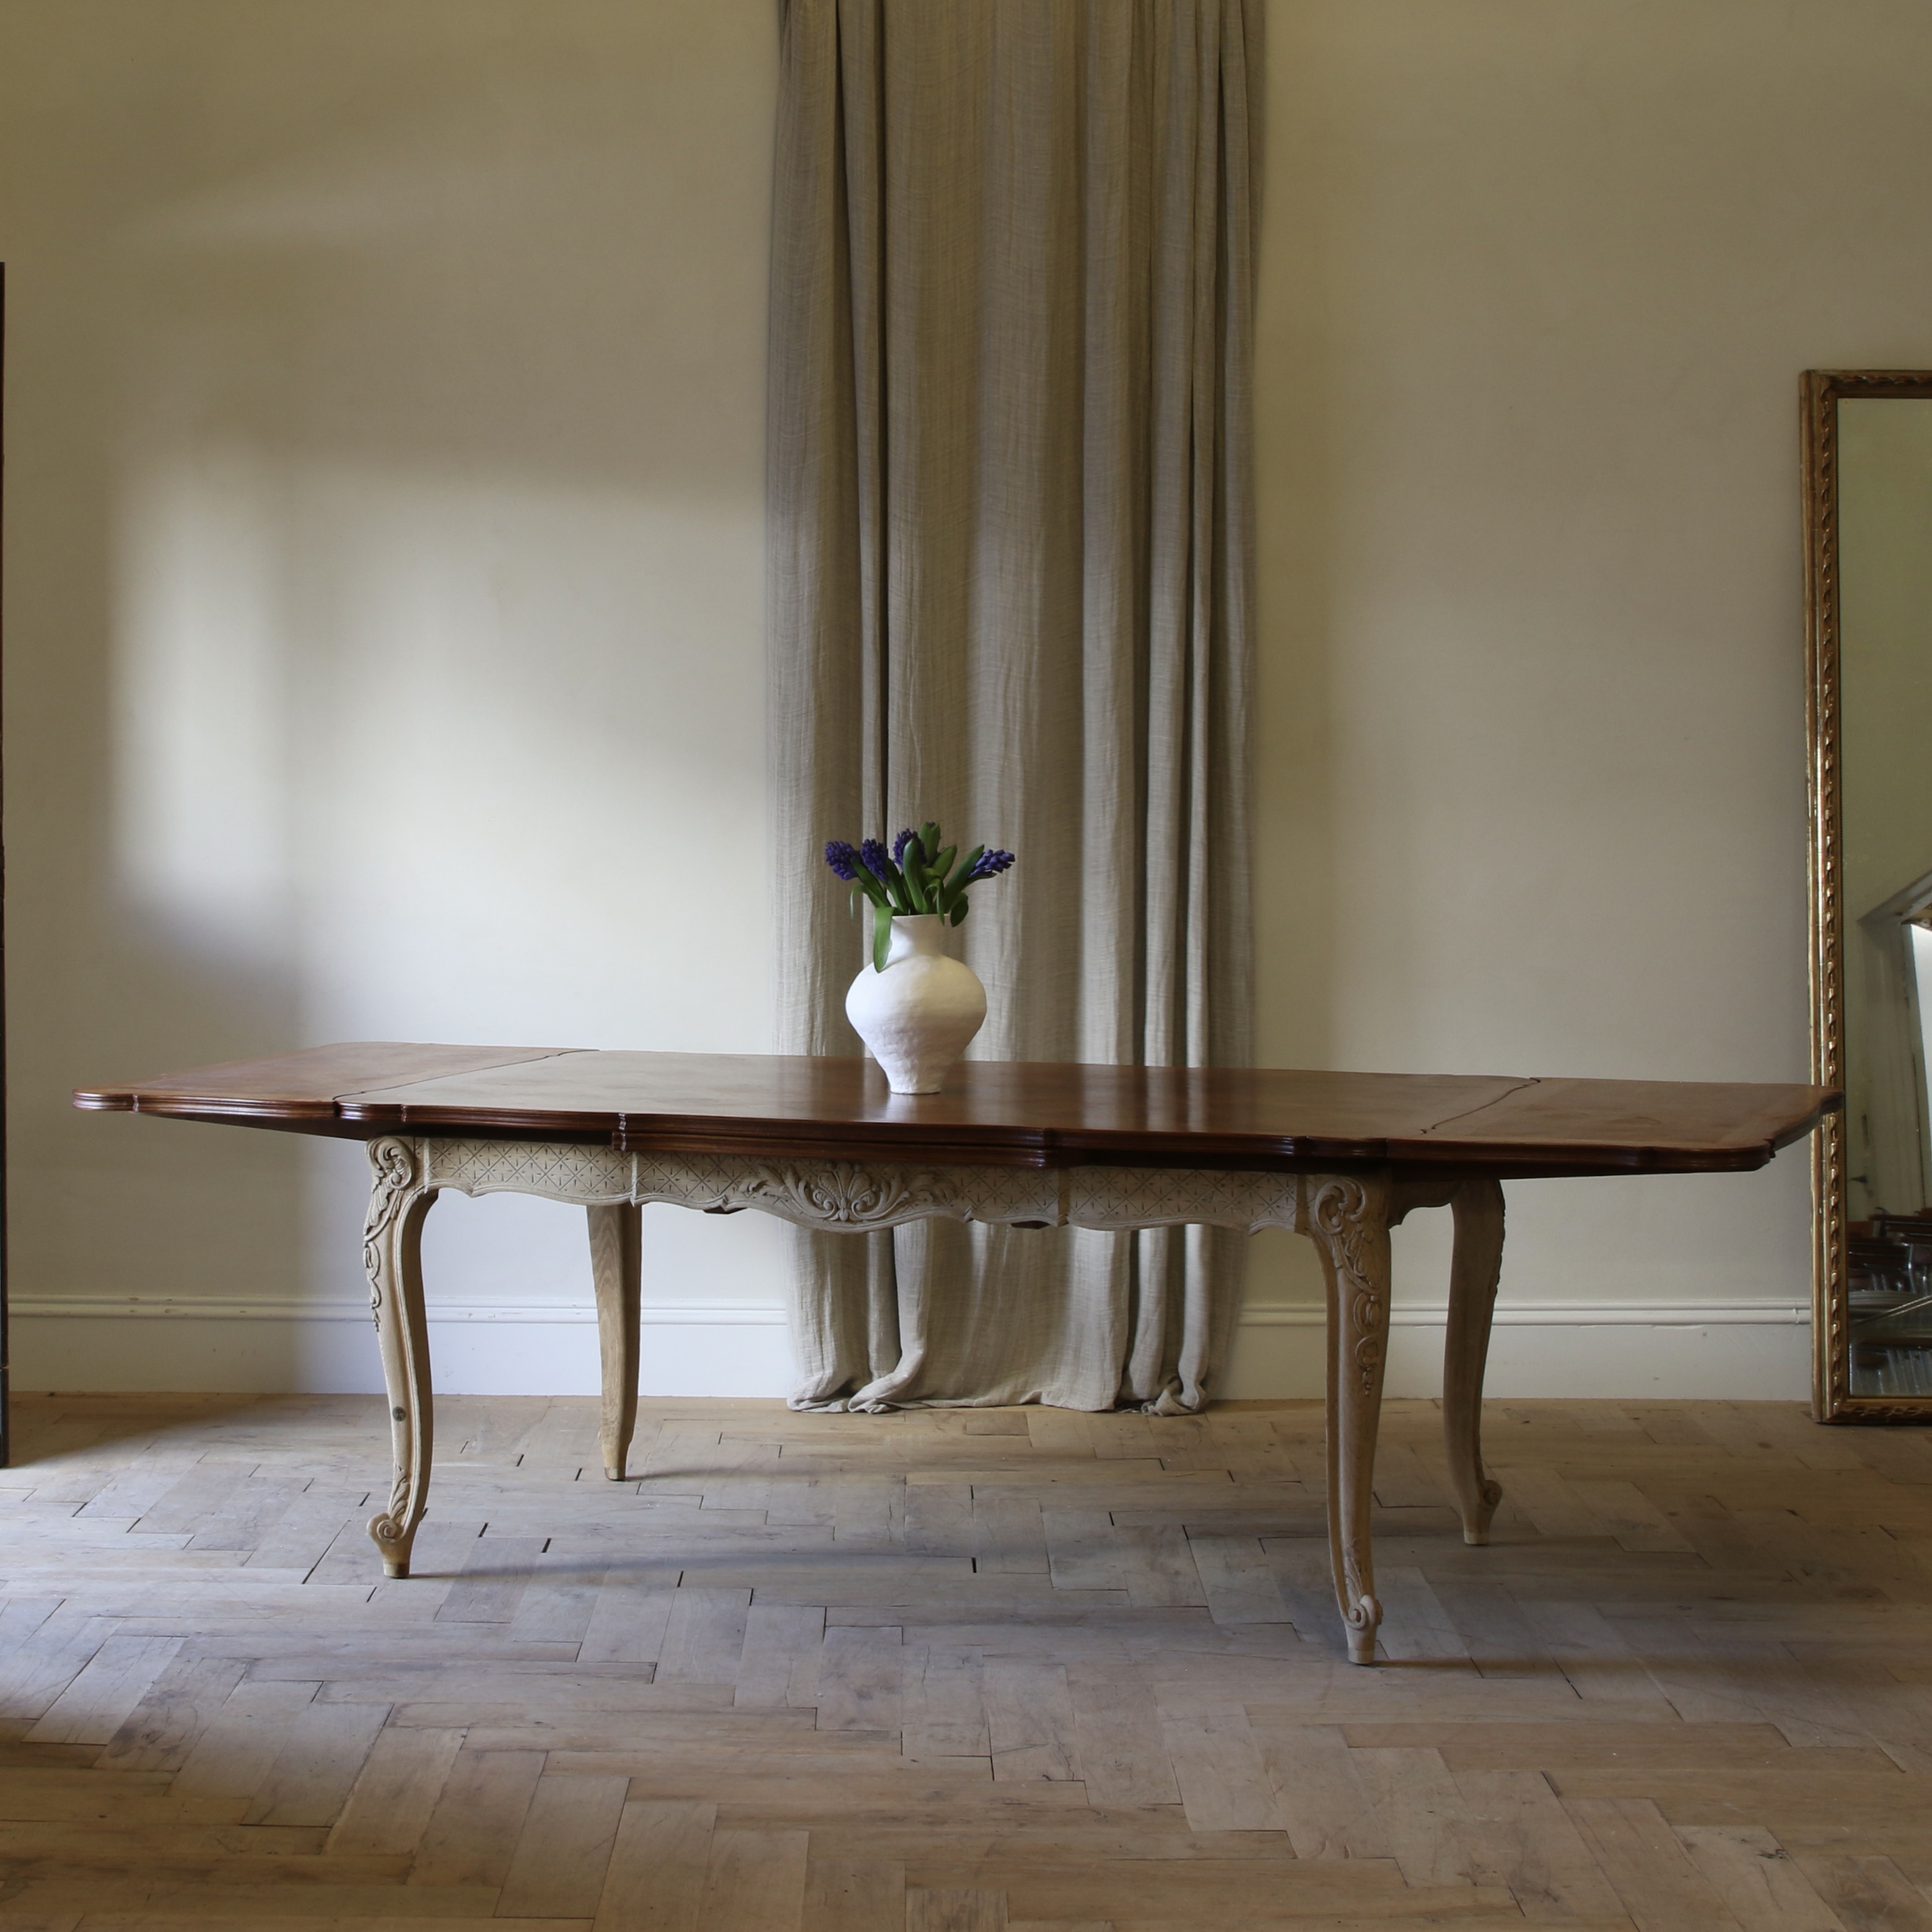 Parquet Dining Table